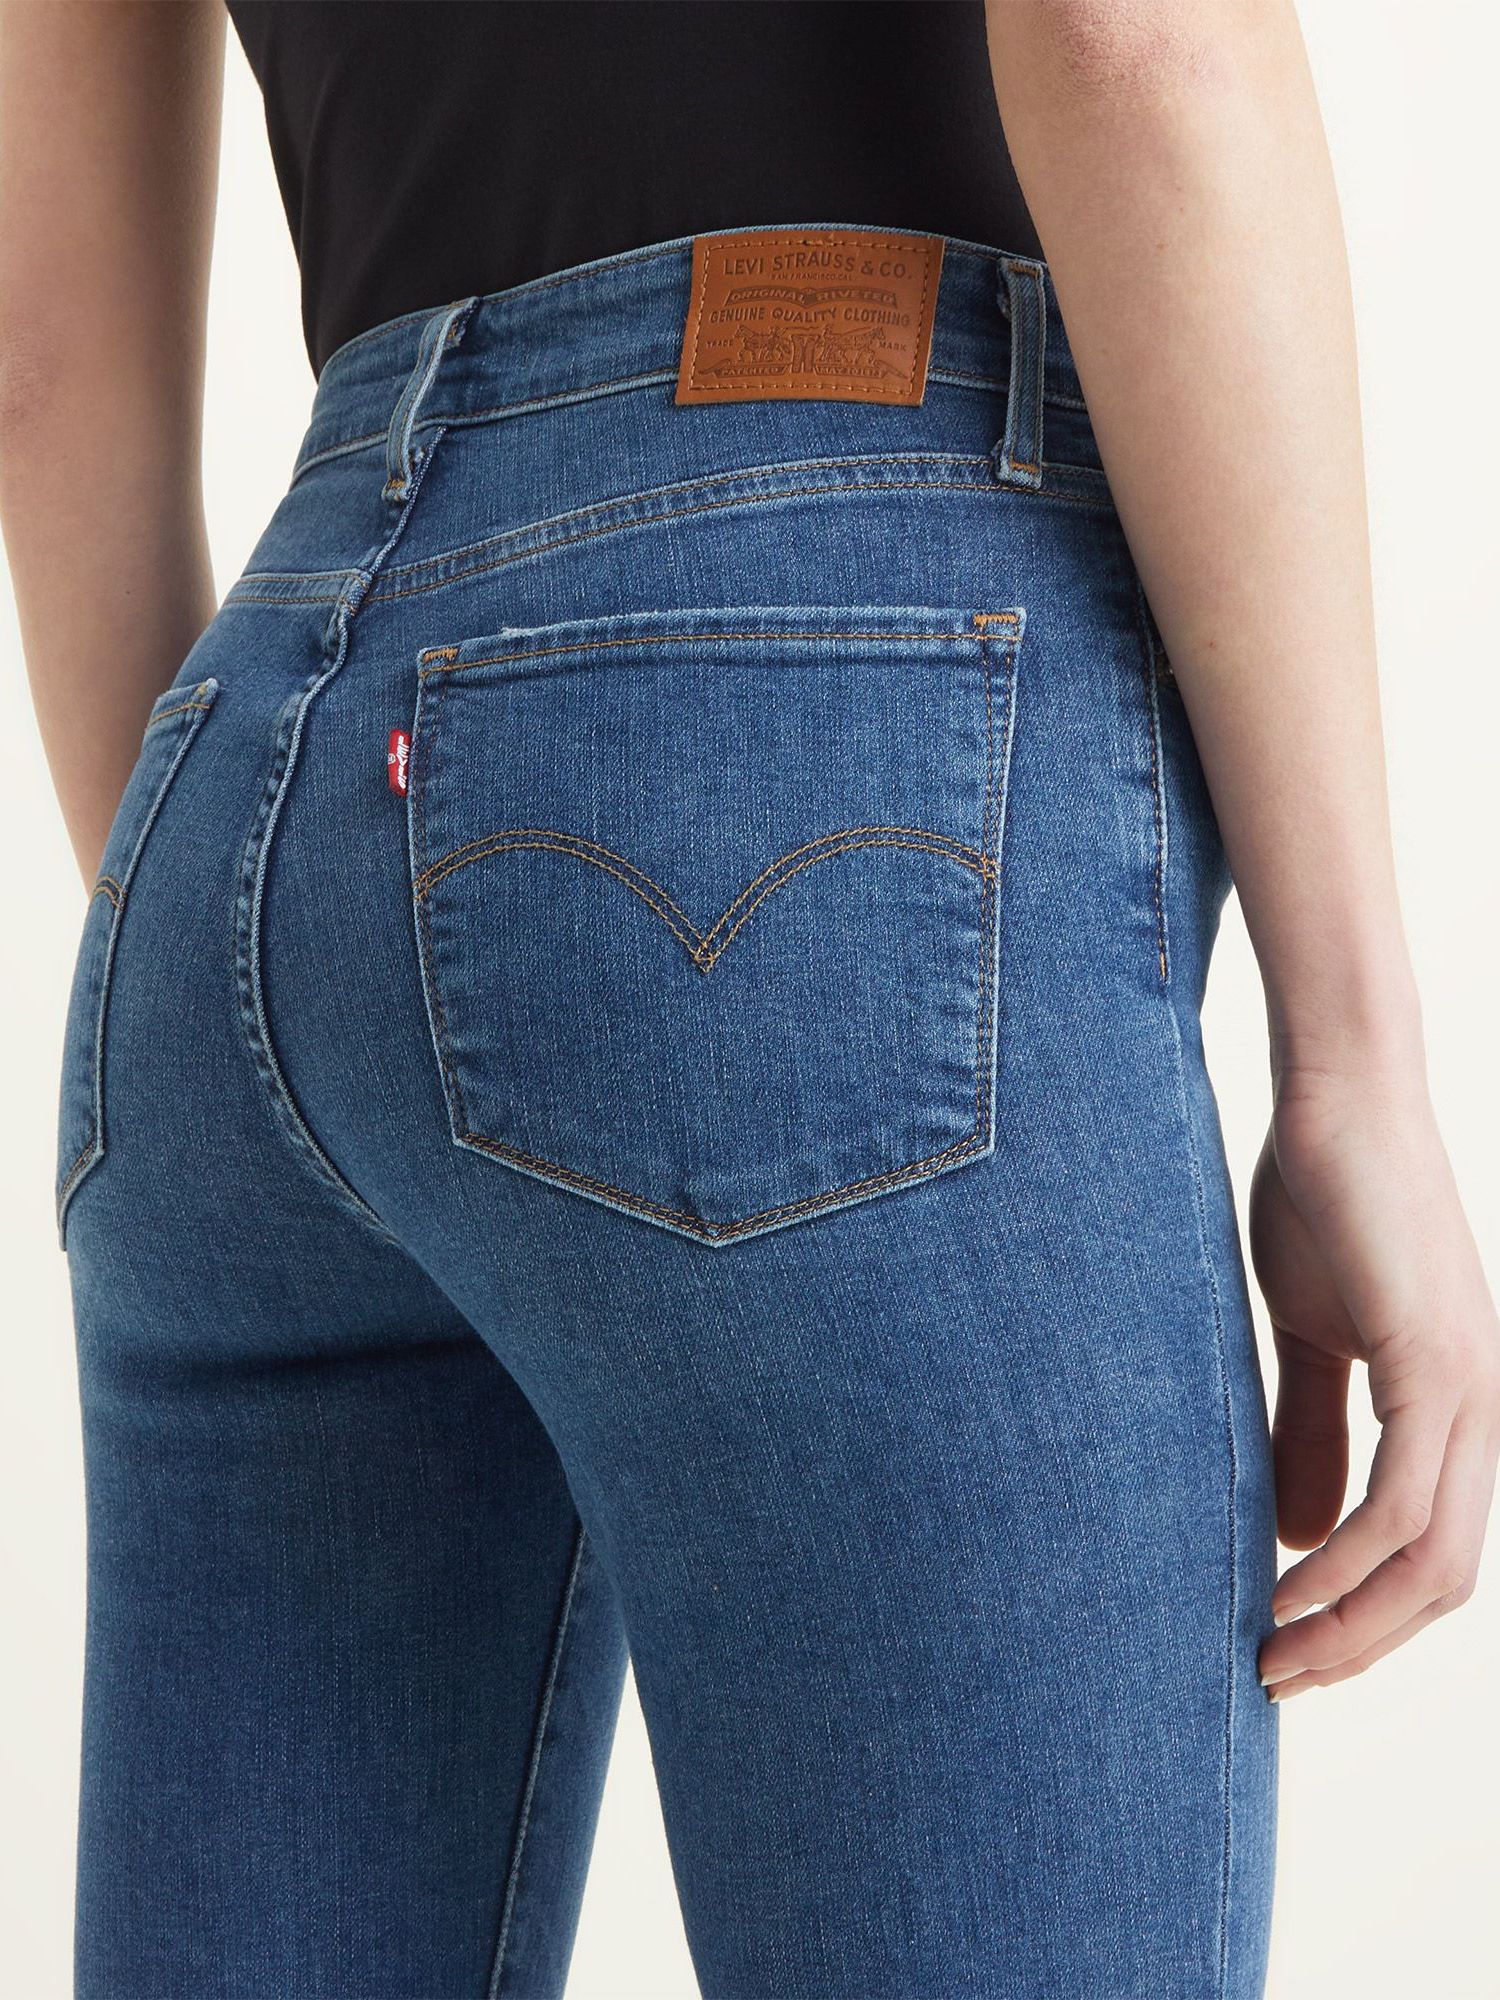 Levi's 725 High Rise Bootcut Jeans, Blow Your Mind at John Lewis & Partners